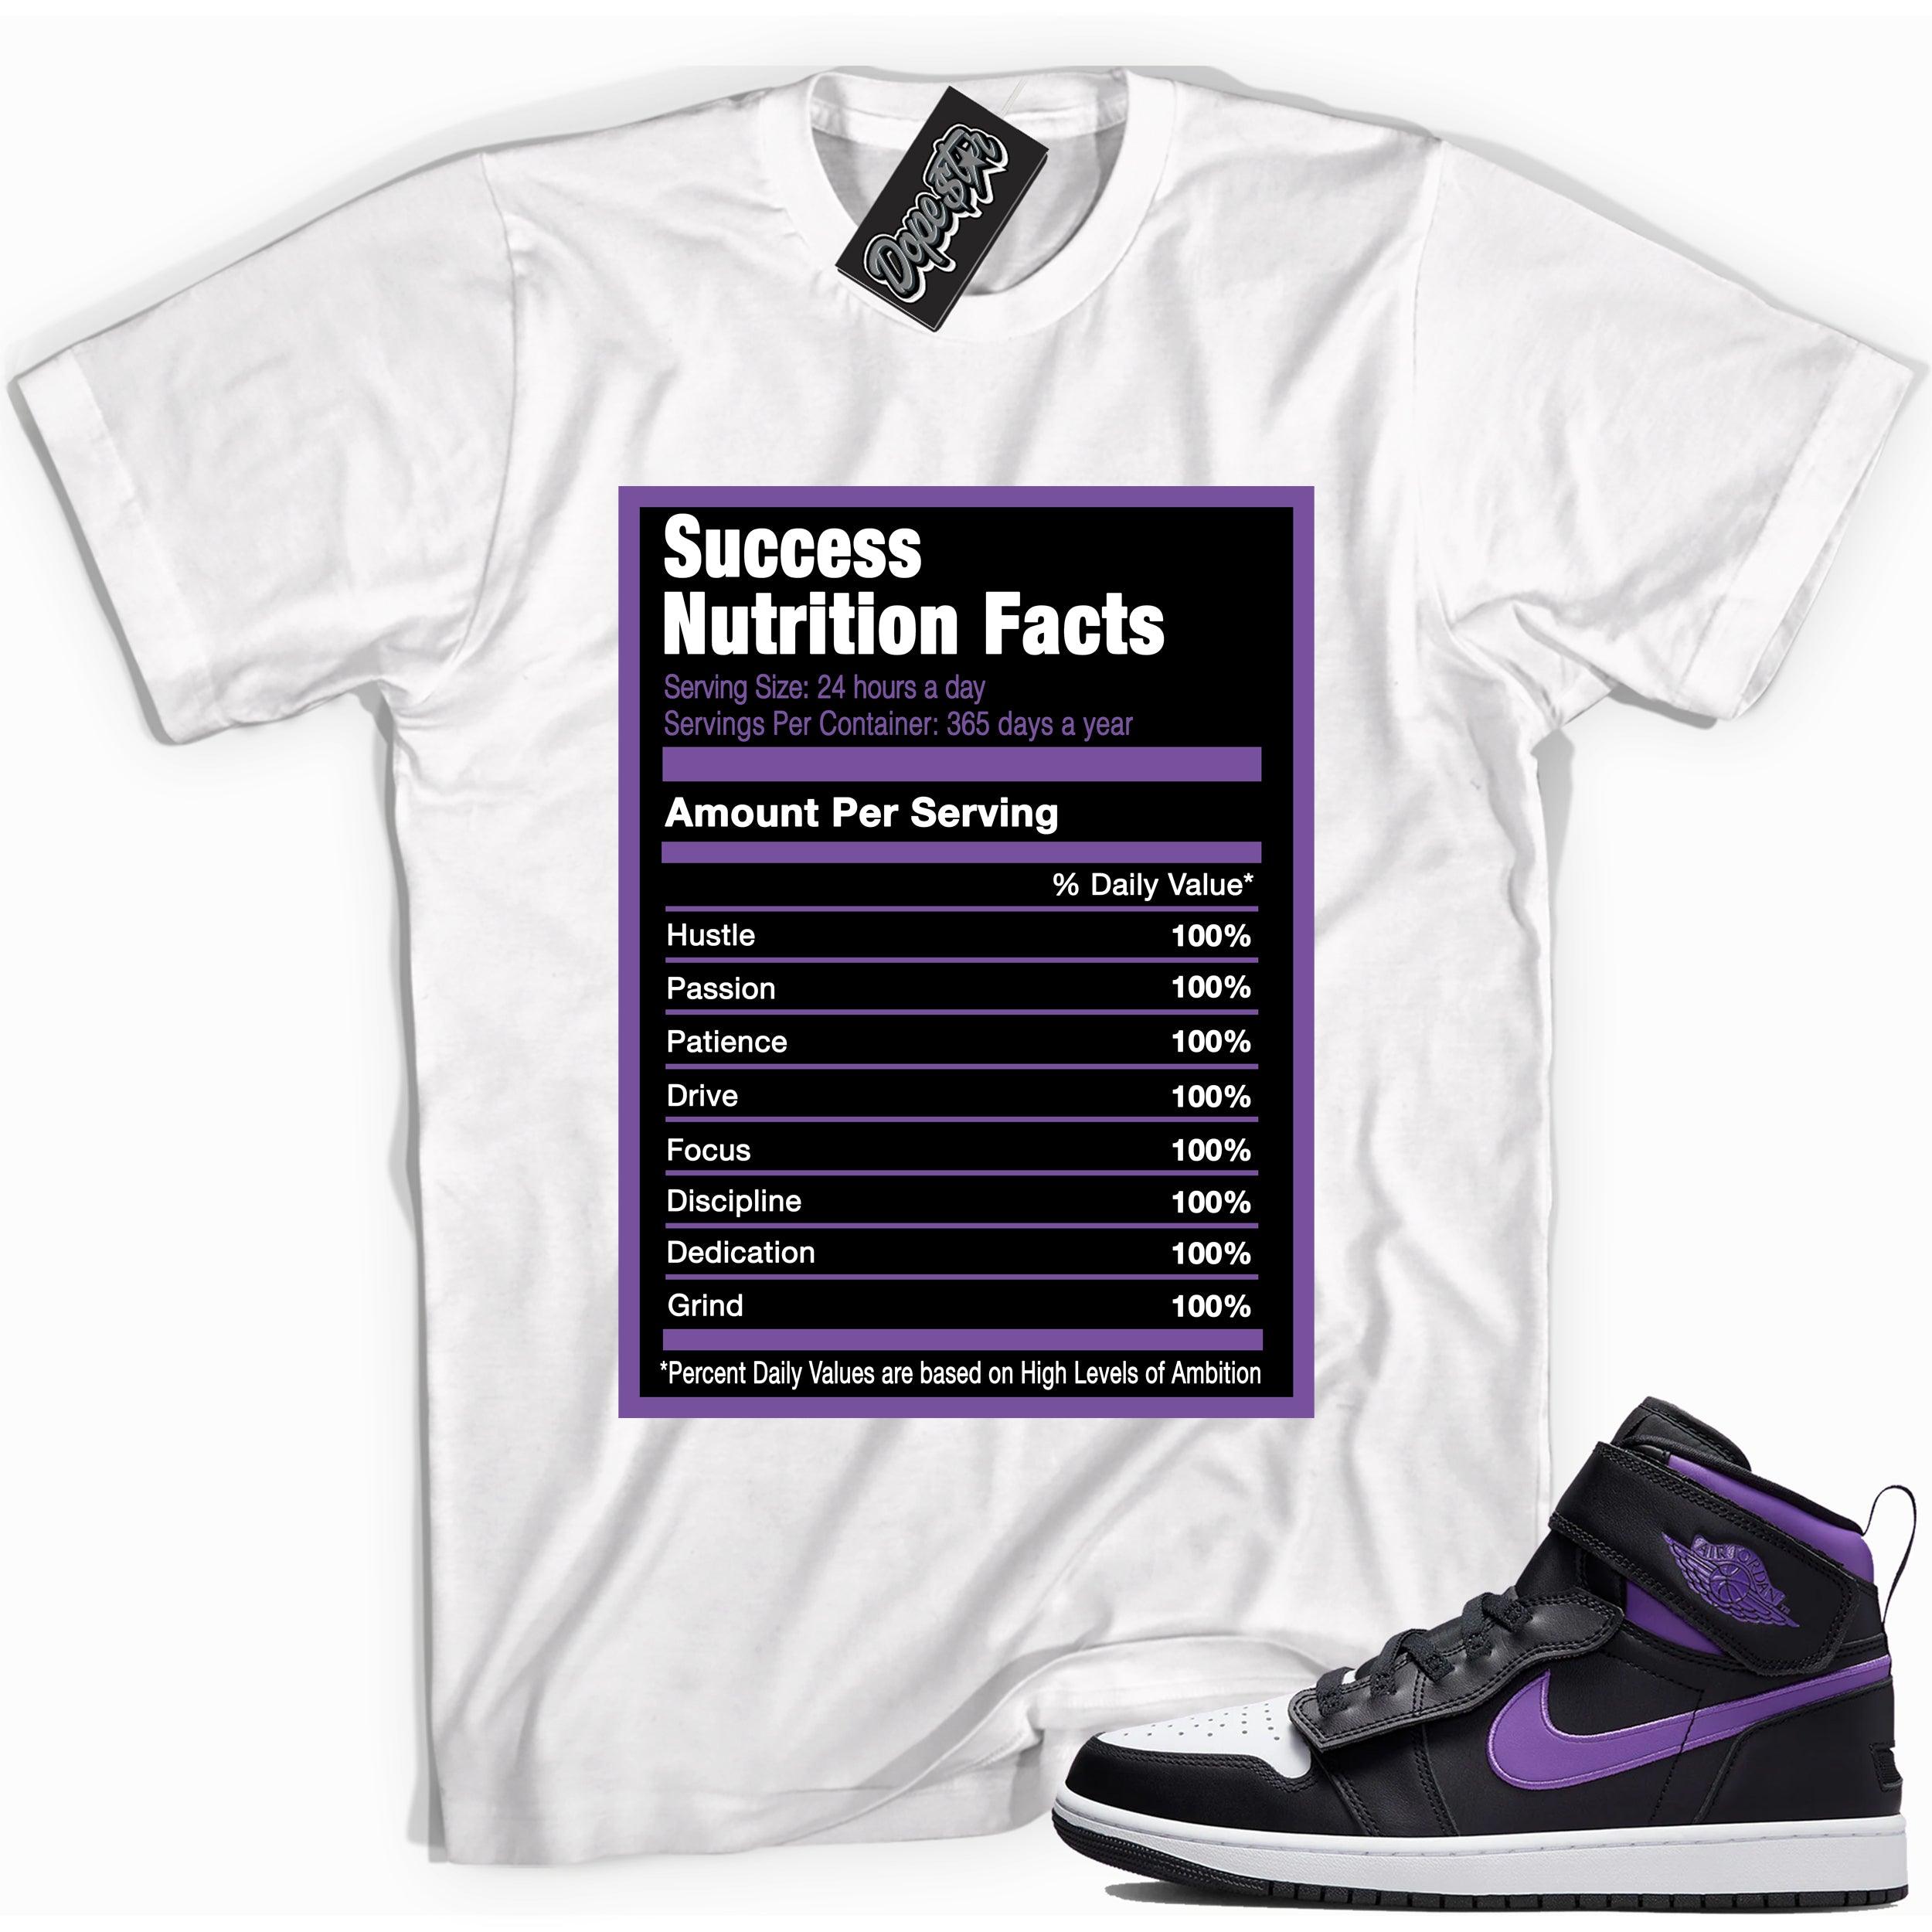 Success Nutrition Shirt AJ 1 High FlyEase Black Bright Violet Sneakers photo